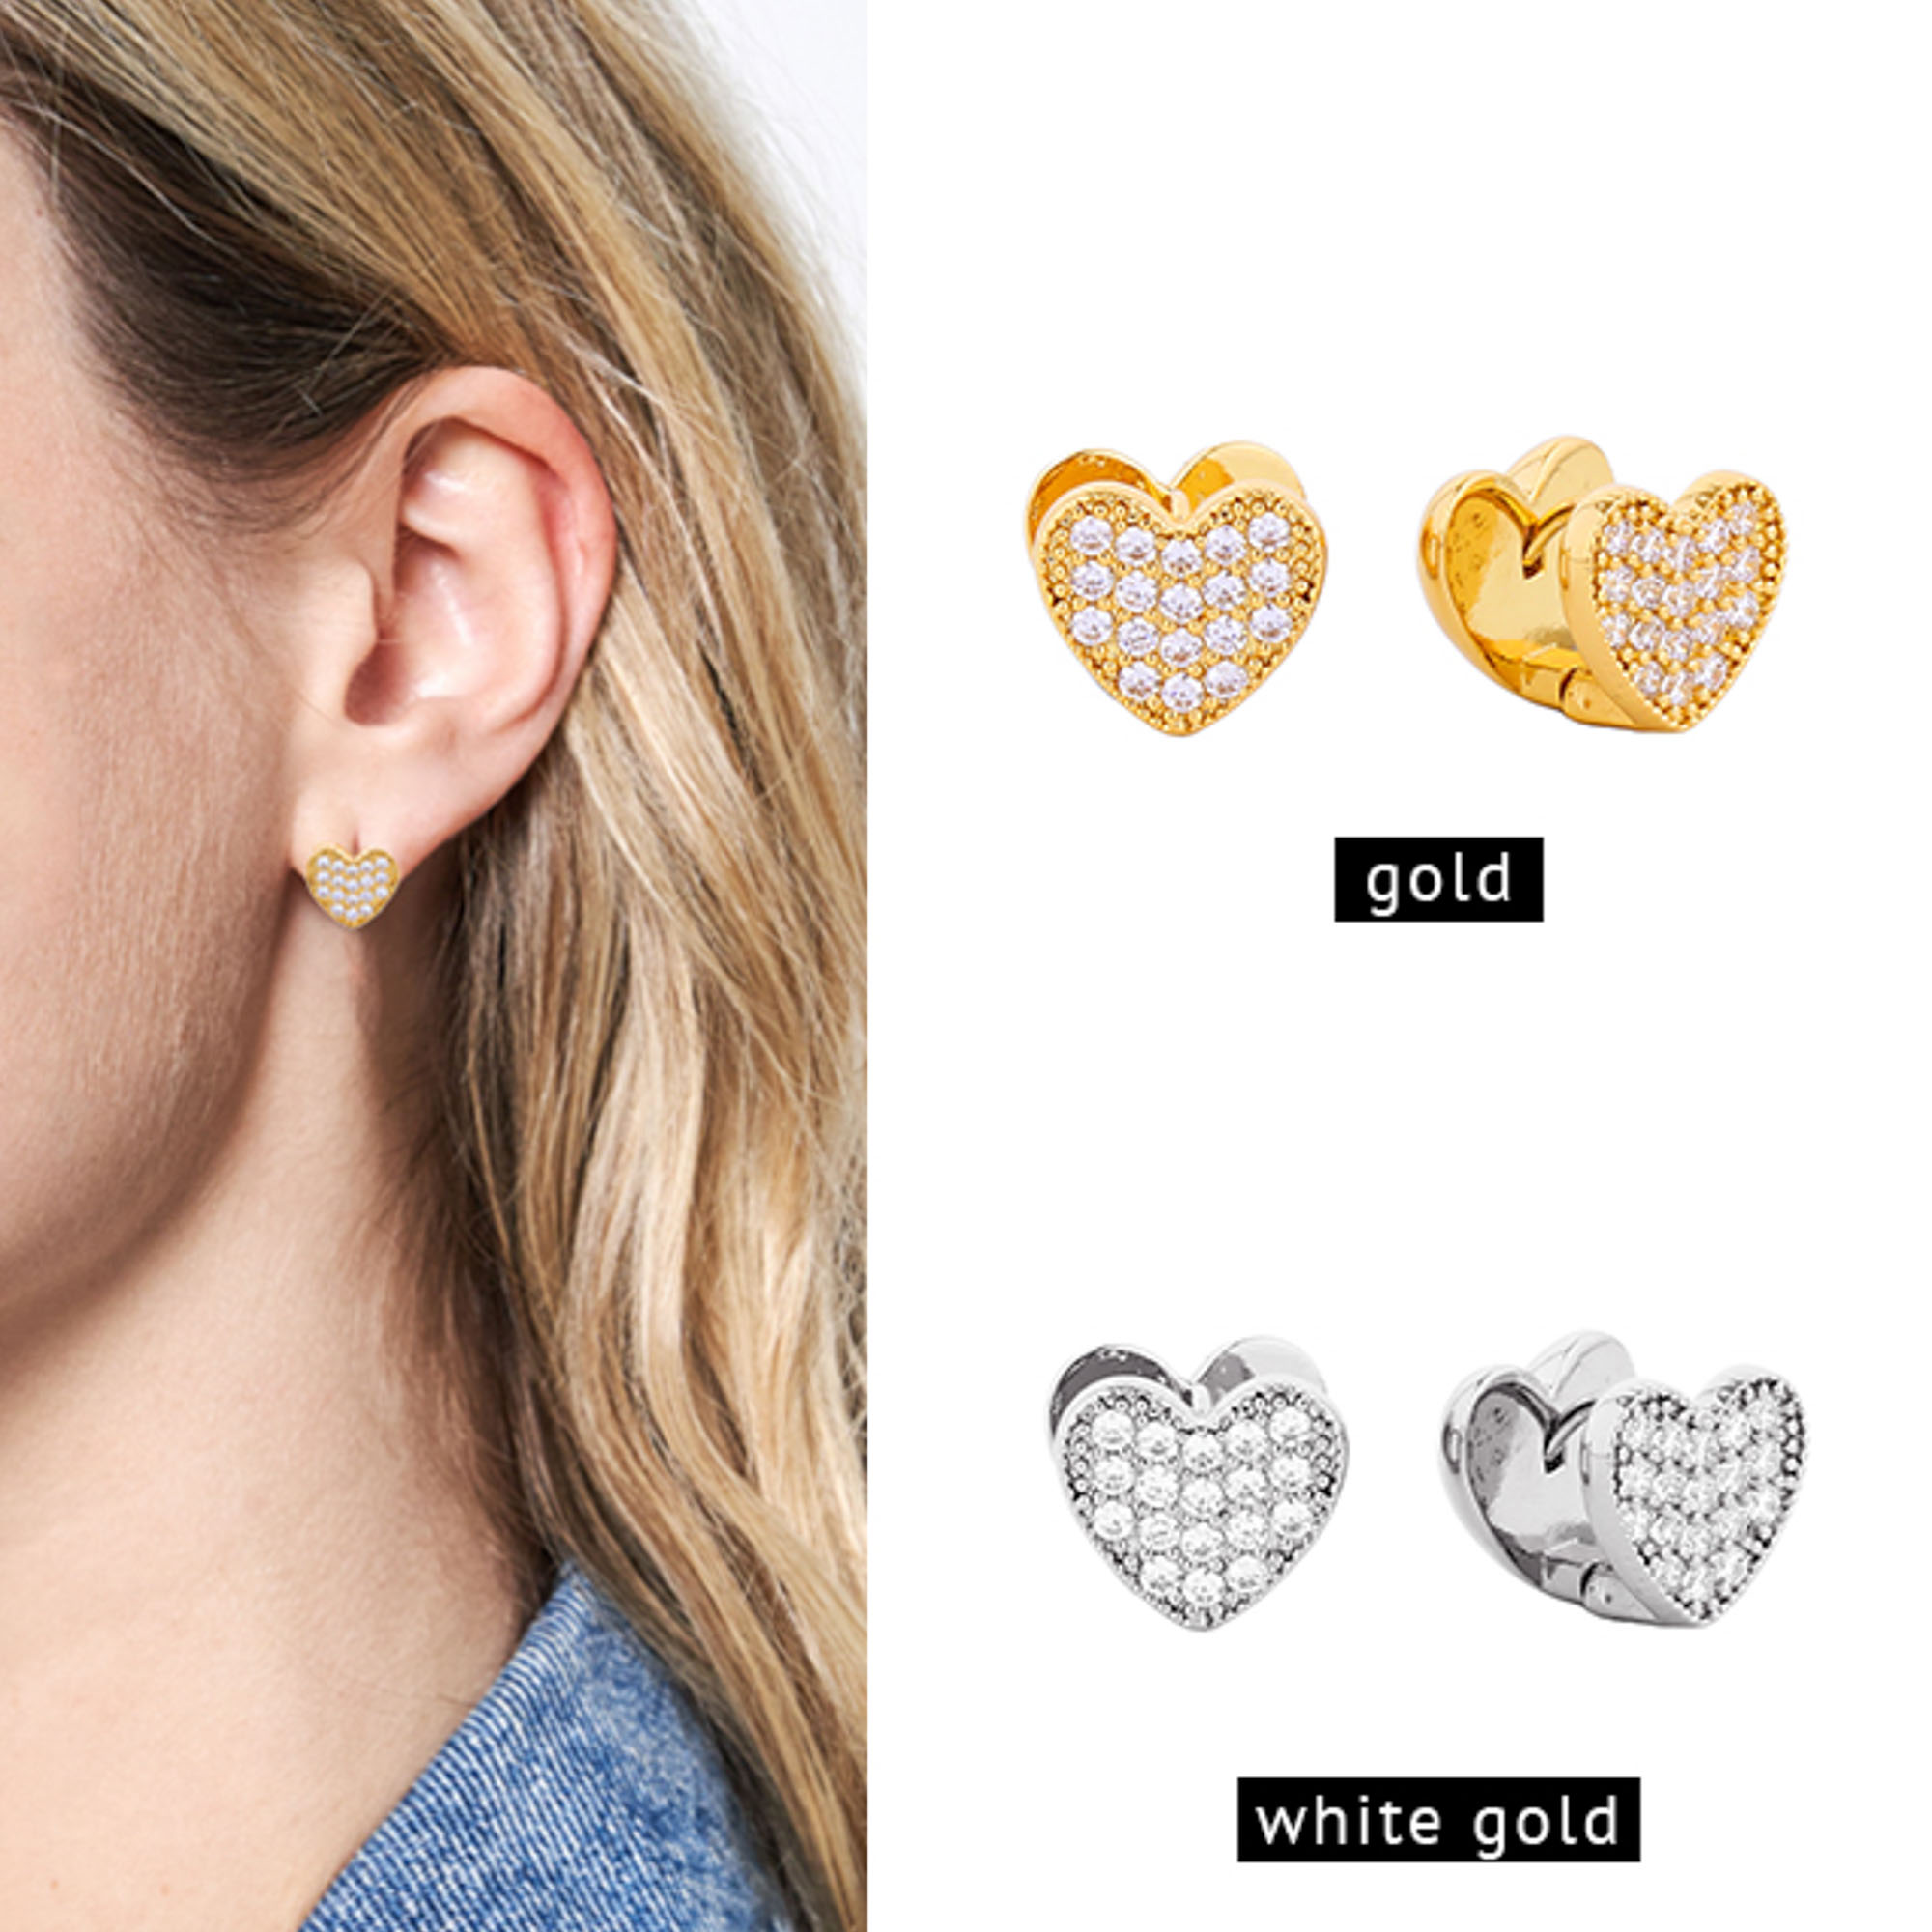 14K GOLD/WHITE GOLD DIPPED HUGGIE EARRING CZ PAVED EARRING